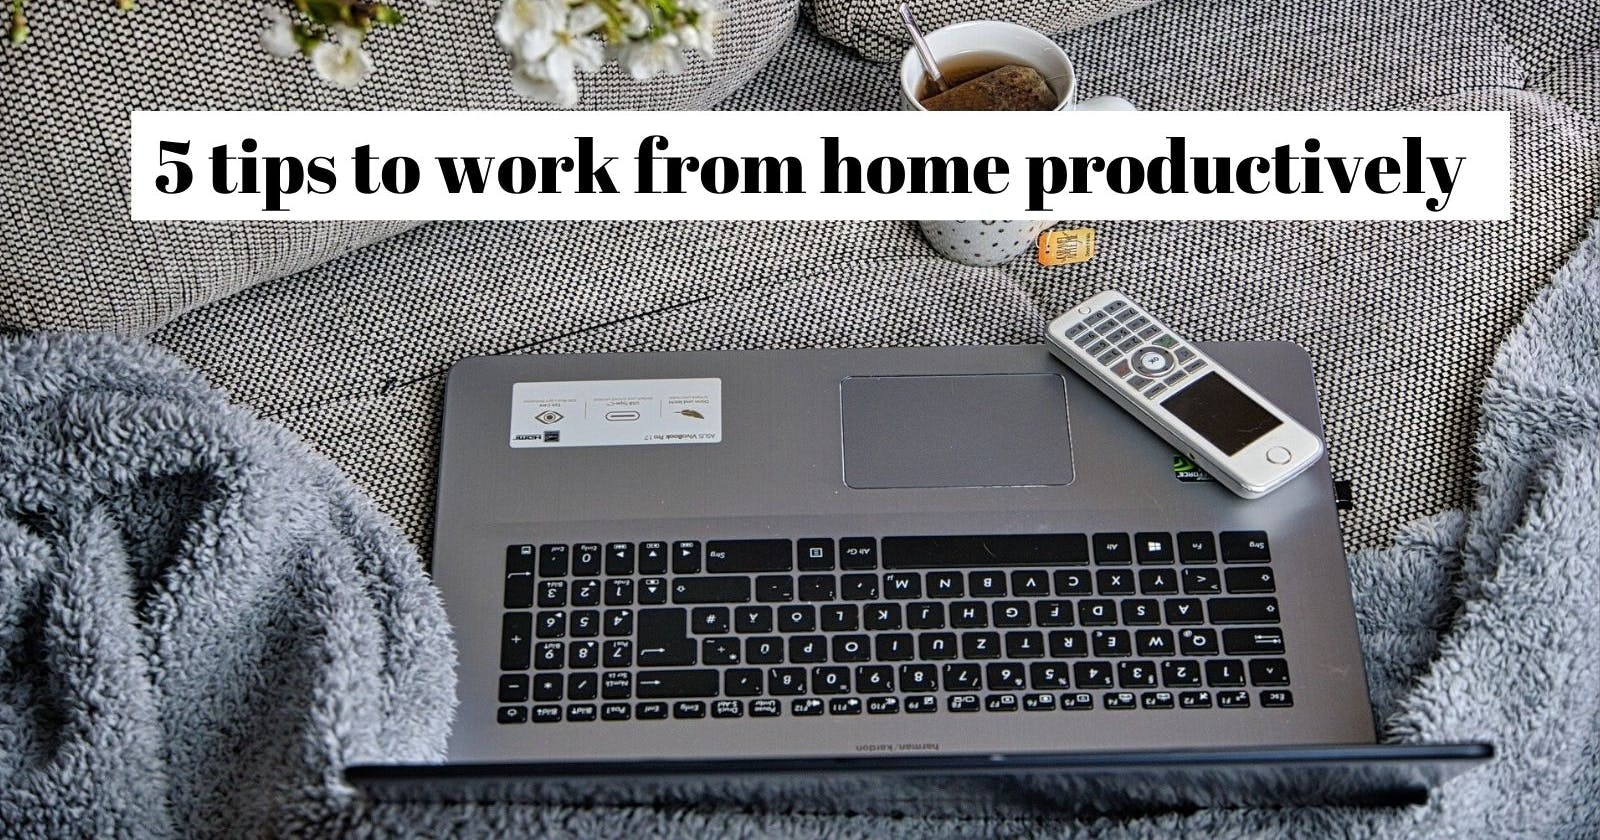 5 tips to work from home productively